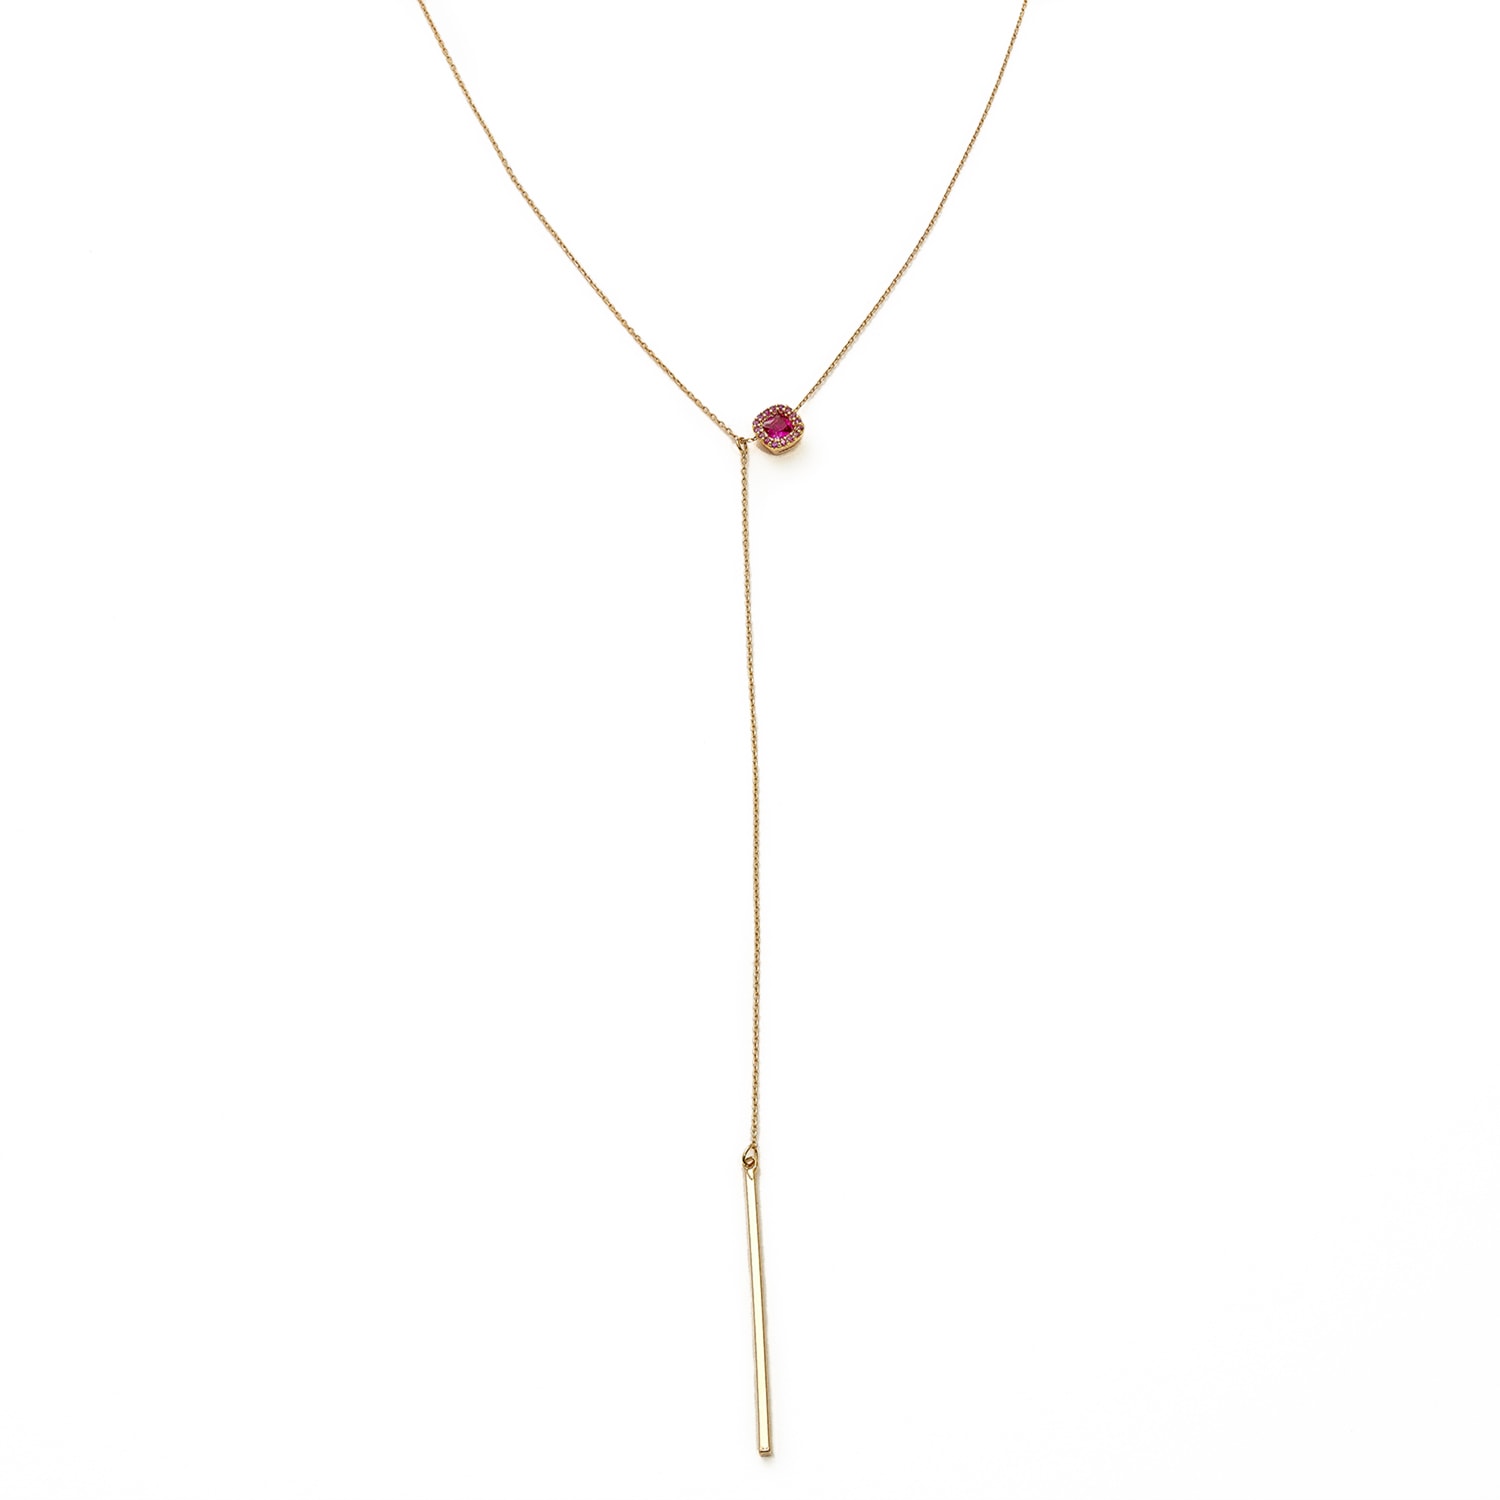 Shabella Nyc Women's Red Ruby Lariat Necklace